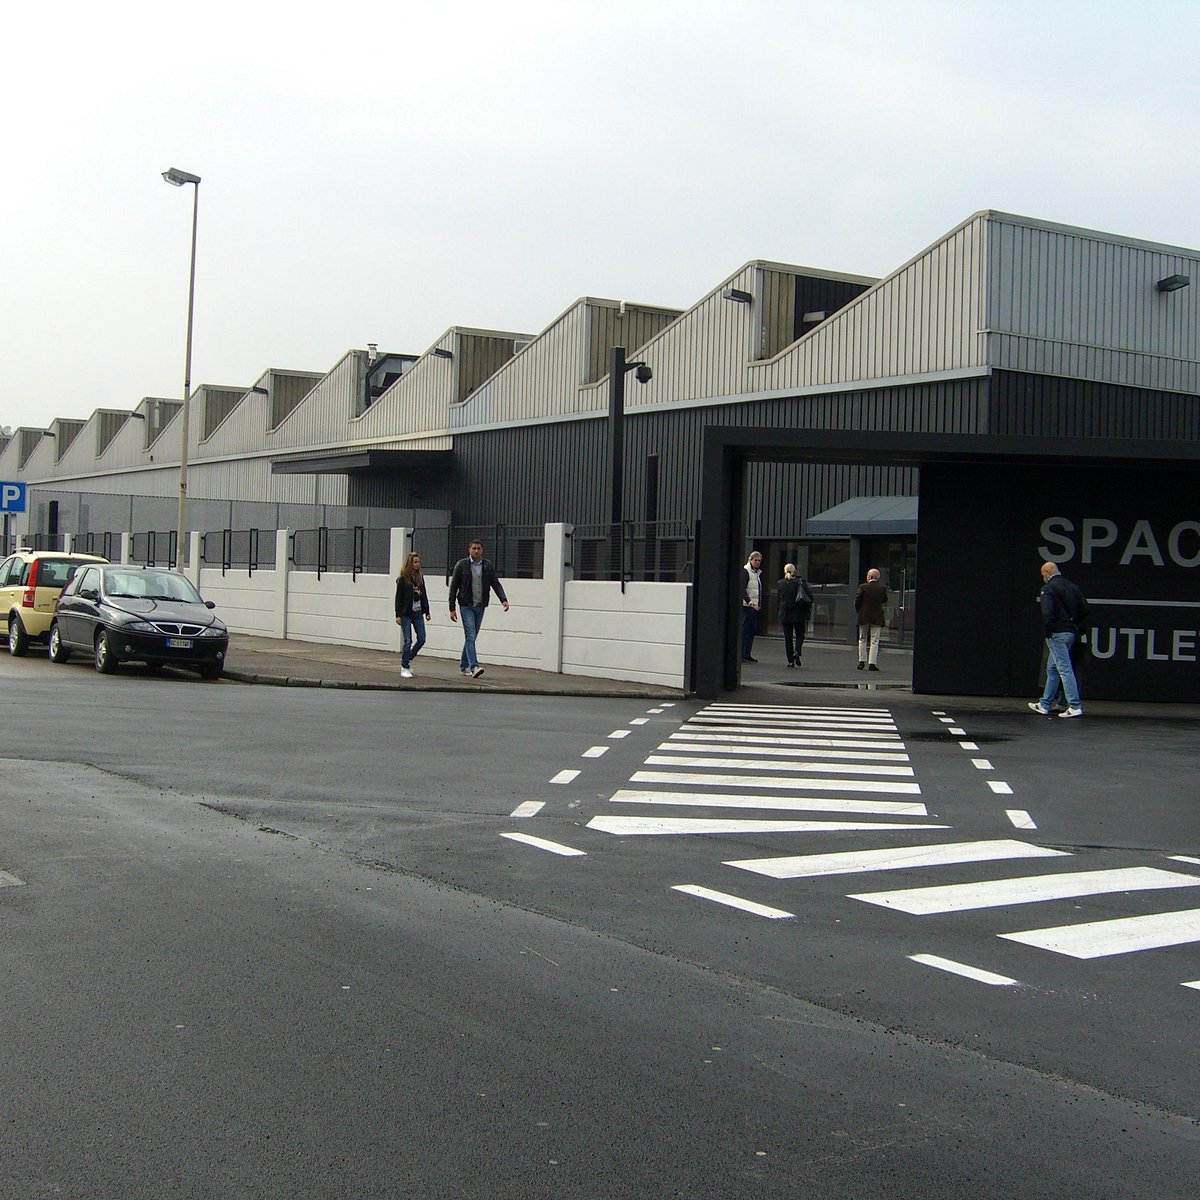 Prada Outlet (Space) (Montevarchi) - All You Need to Know BEFORE You Go